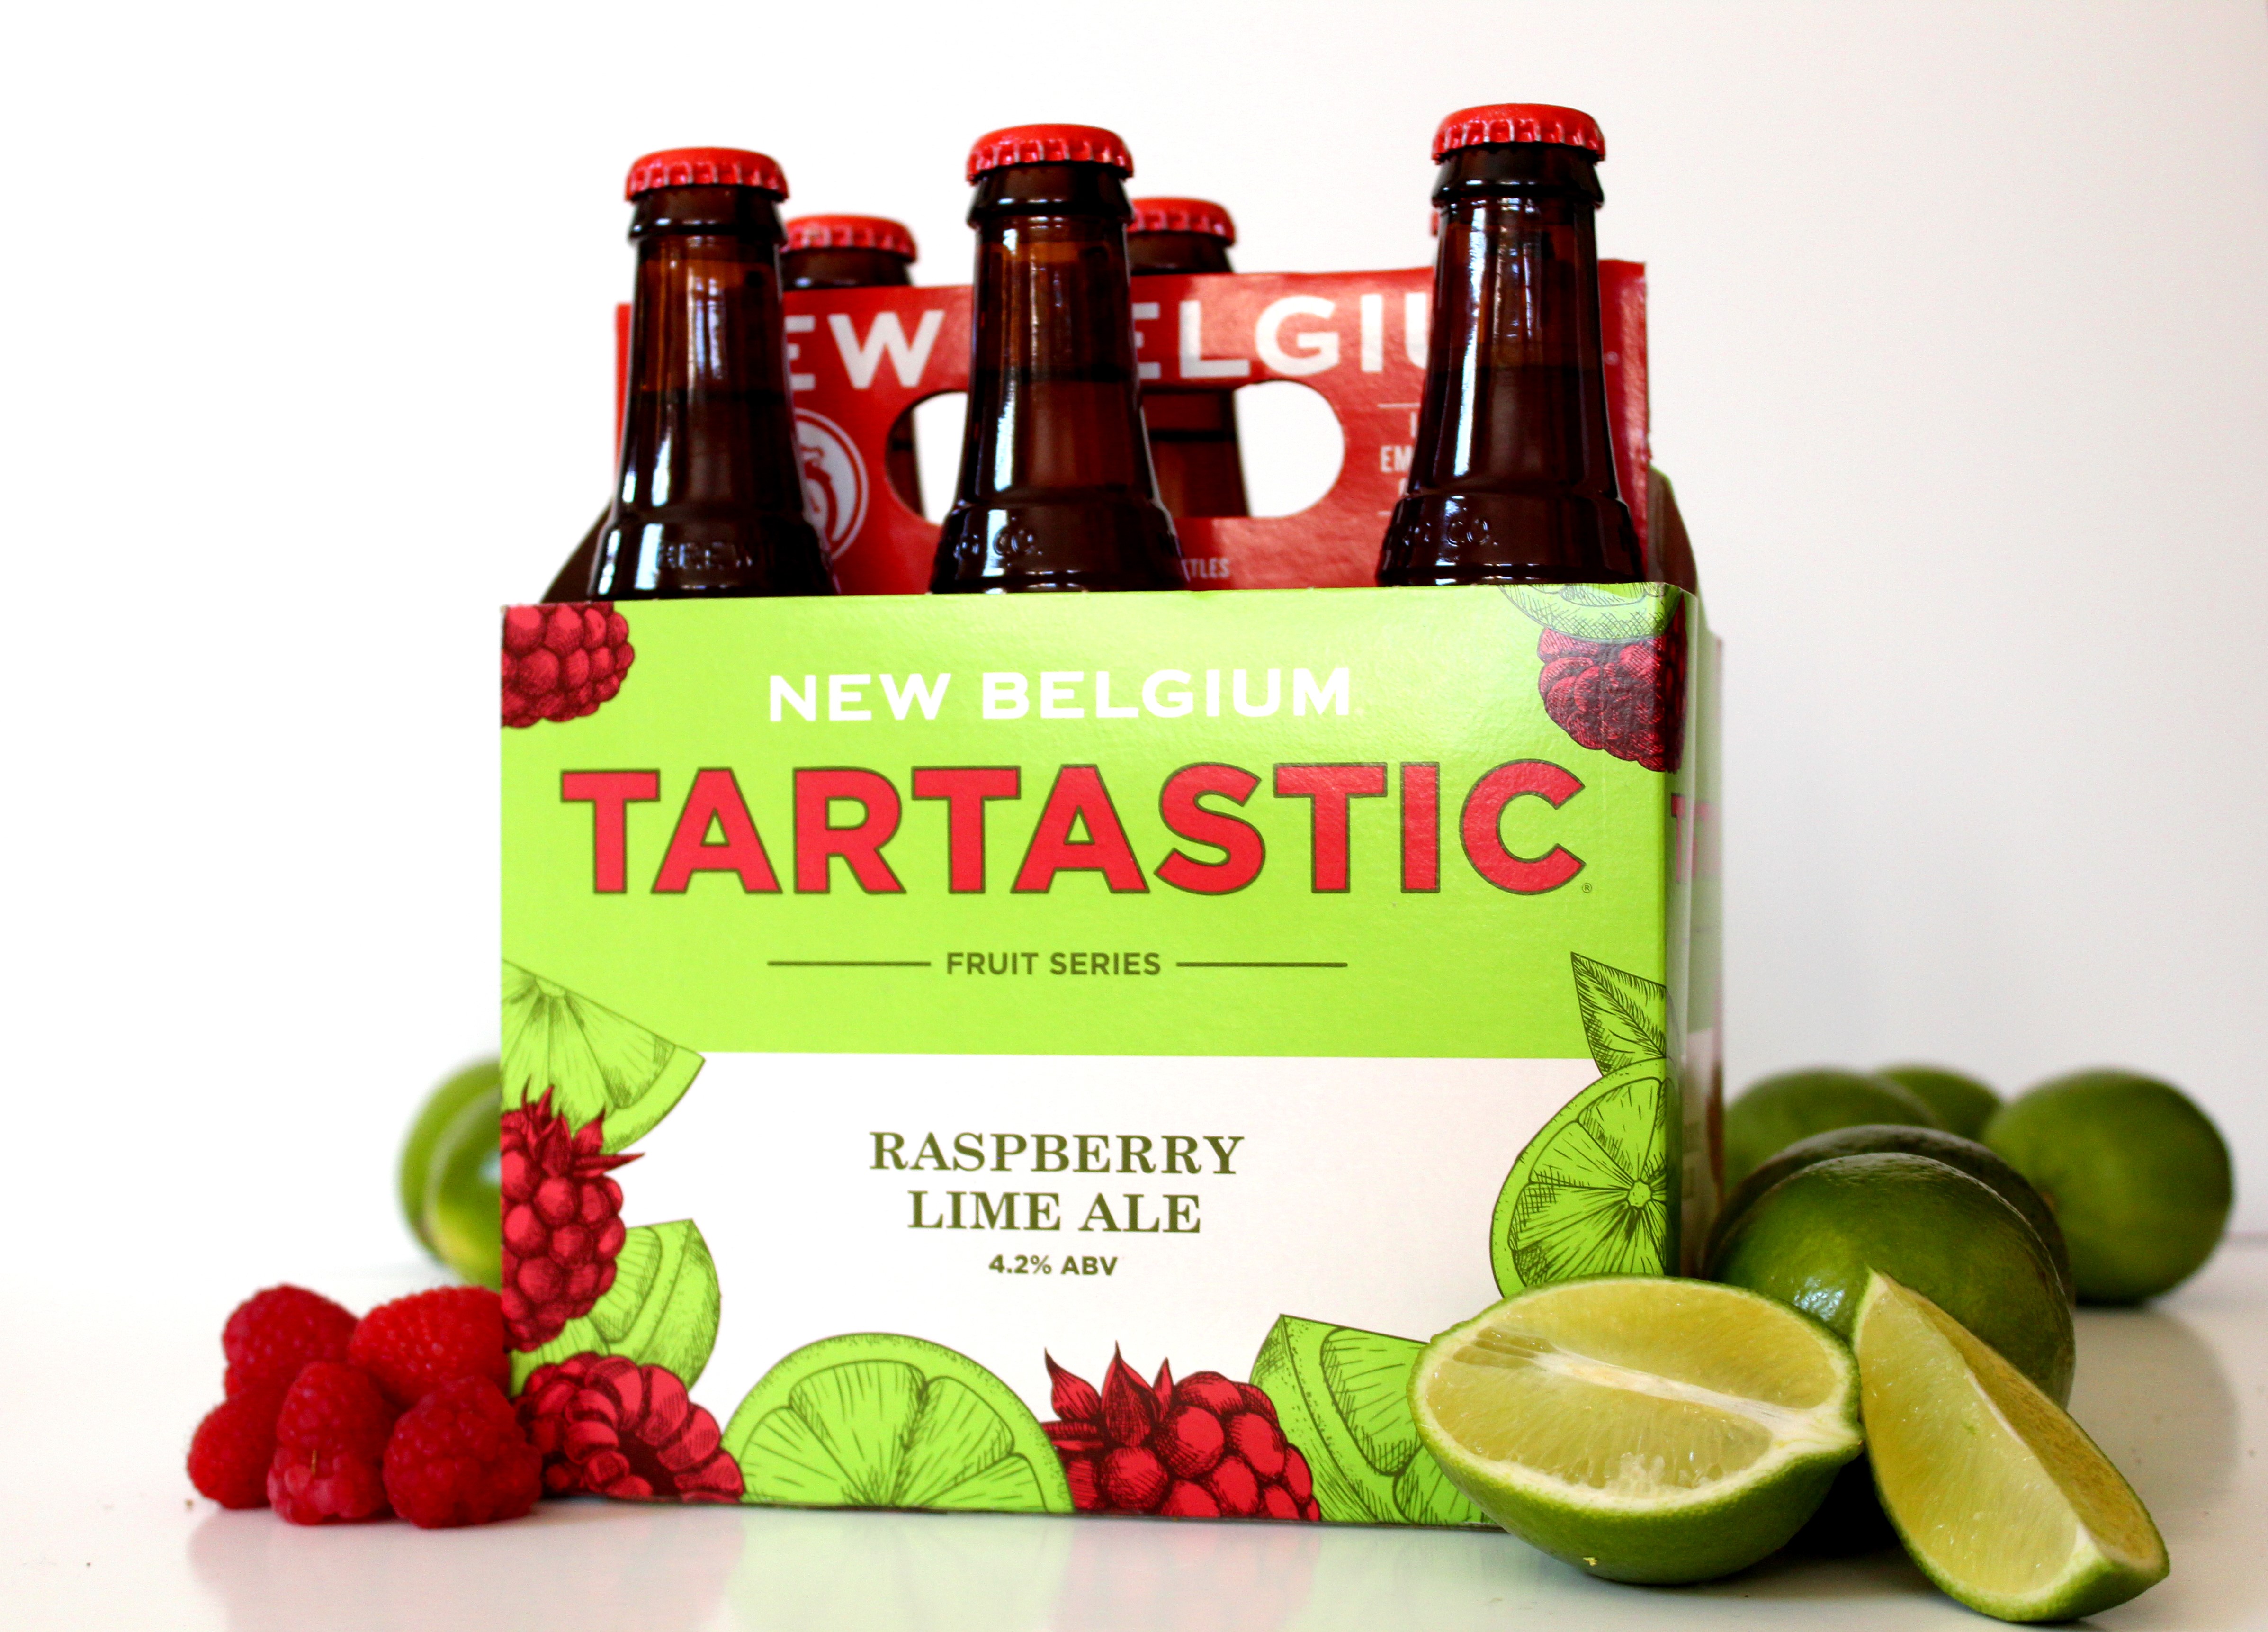 image of Tartastic Raspberry Lime Ale courtesy of New Belgium Brewing